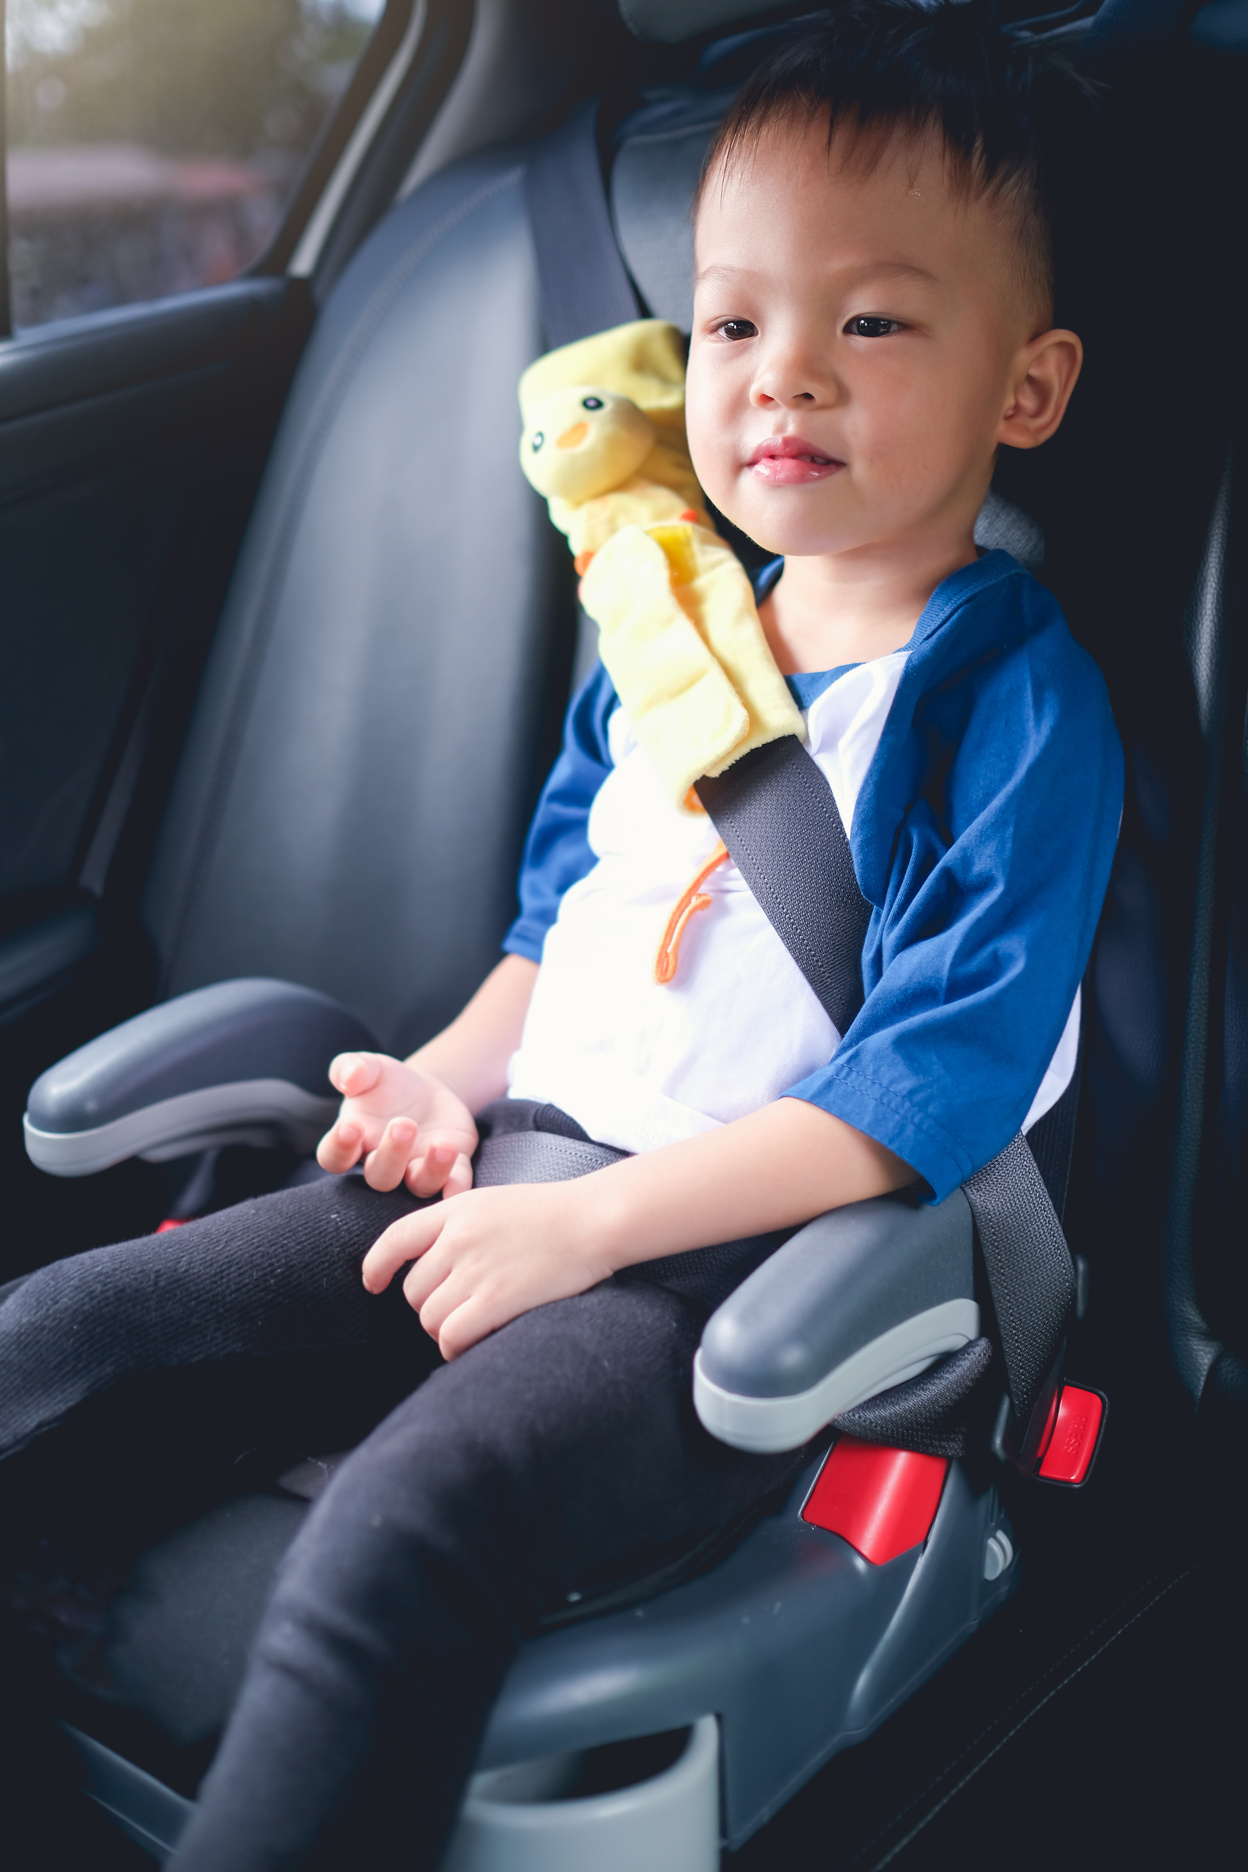 Asian 3 - 4 years old toddler boy child sitting in booster car seat, Happy traveling, Child passenger safety